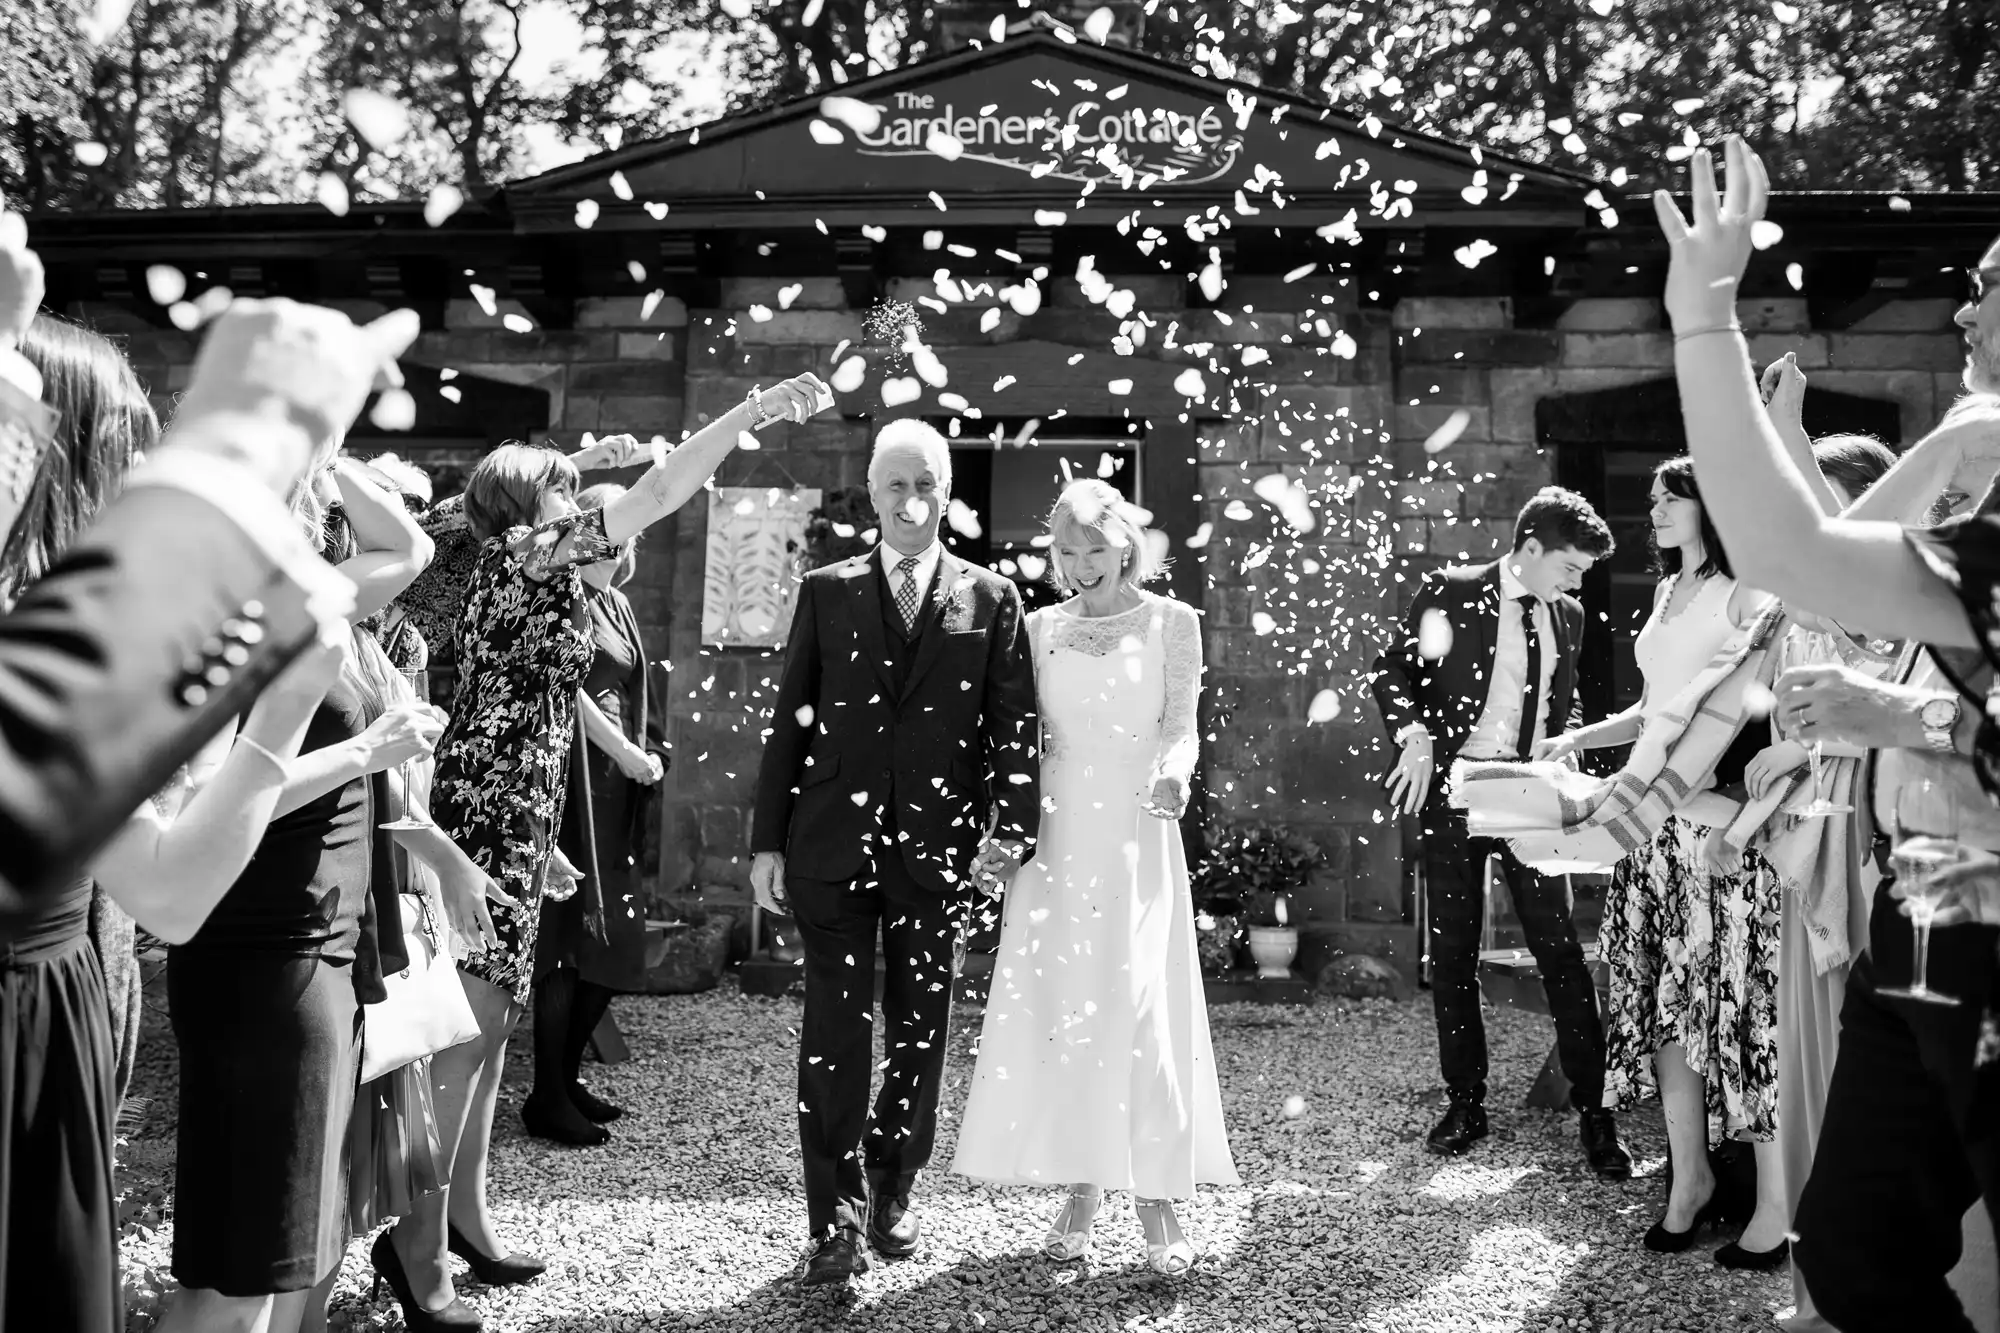 A bride and groom walk down a gravel path while guests throw confetti around them outside The Gardener's Cottage.